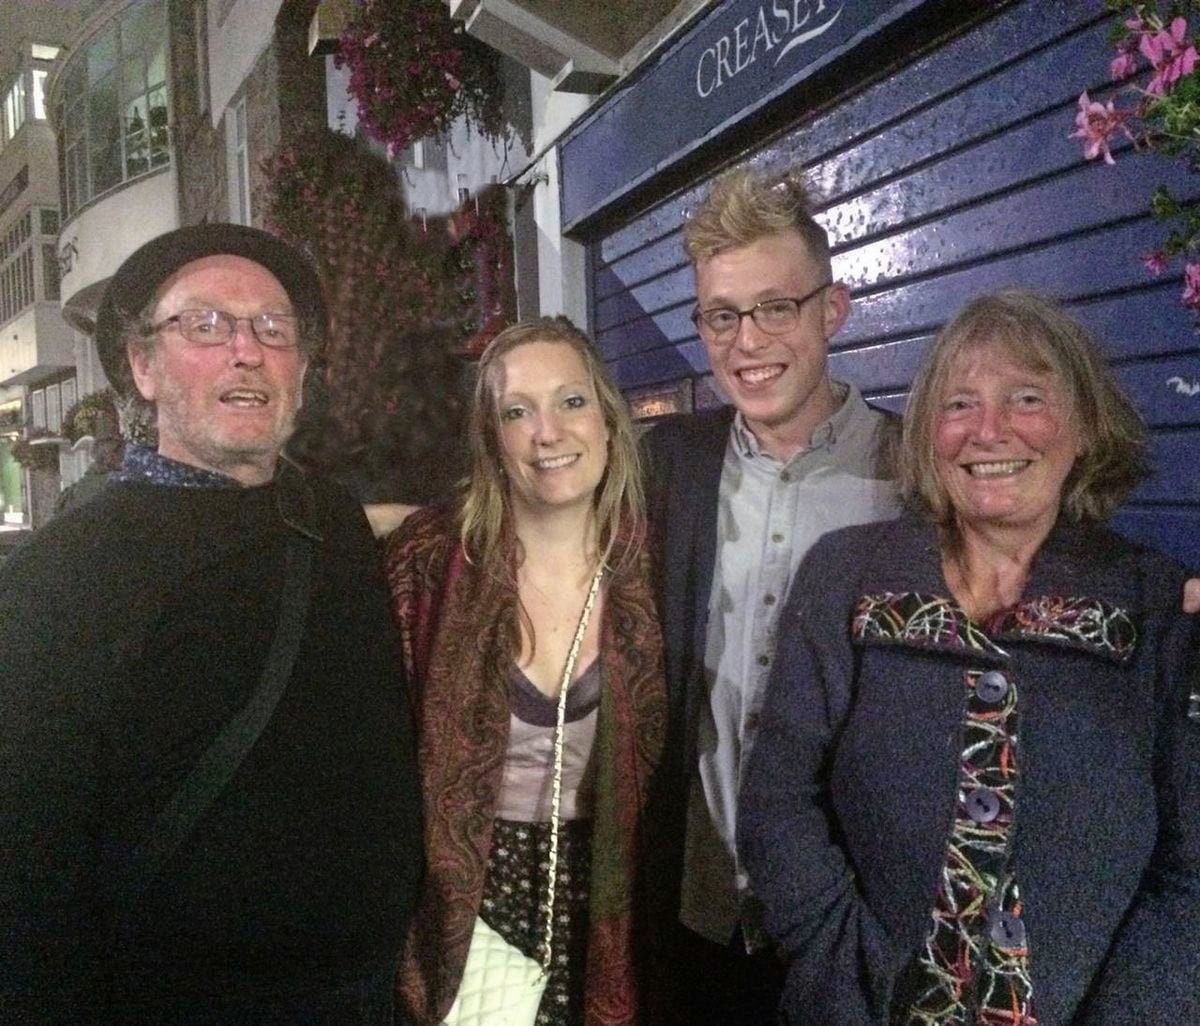 Pip Orchard's family are calling for a review of sentencing guidelines.
L-R Thomas Orchard, his daughter Polly, his son Pip and his wife Carol after a local jazz gig in St Peter Port. Pip is a keen jazz musician. (29581132)